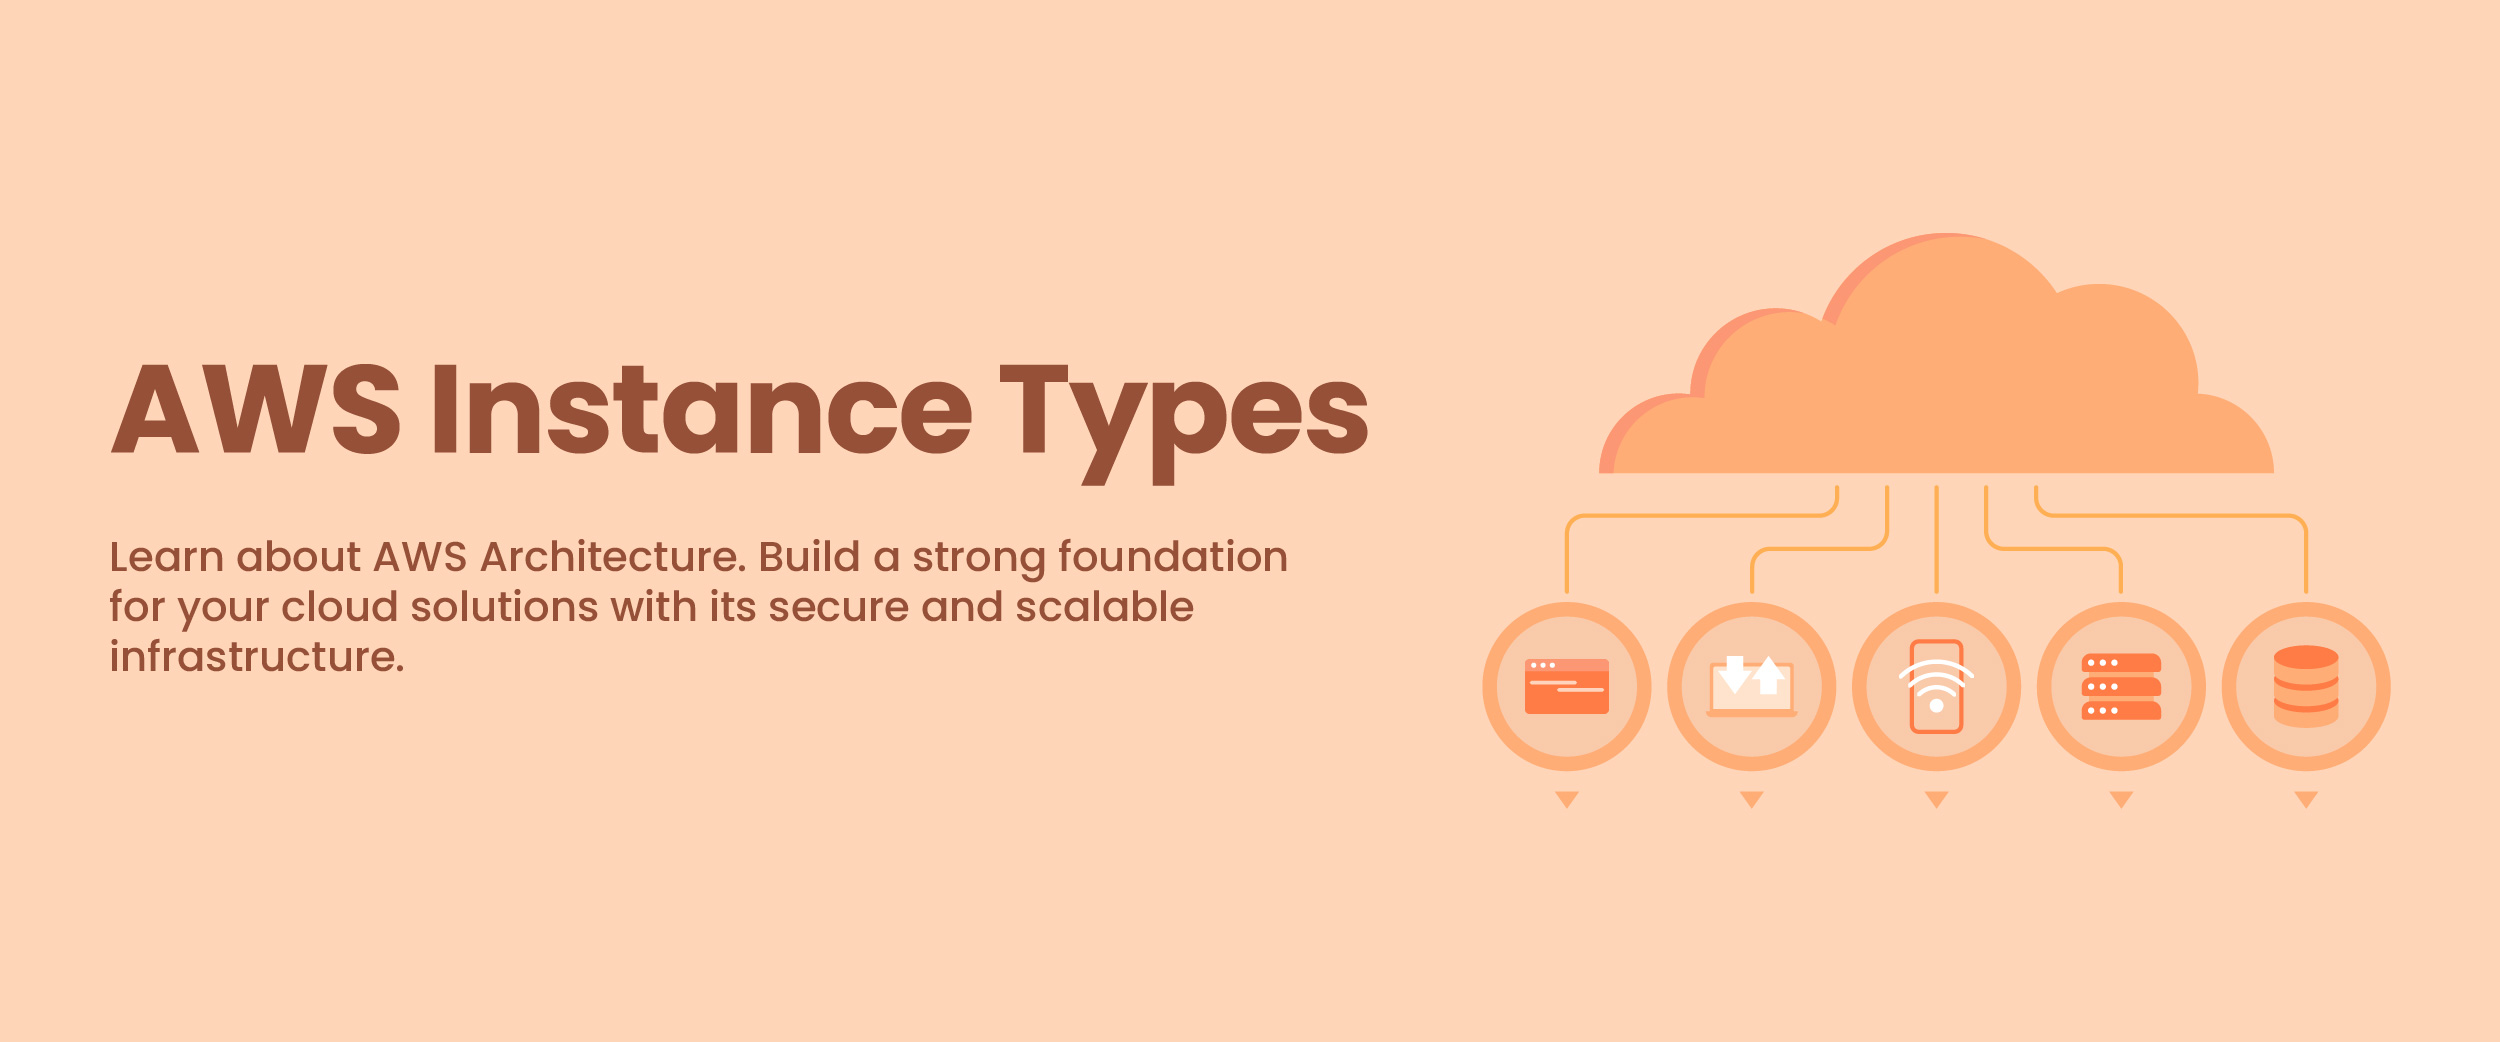 AWS instance types